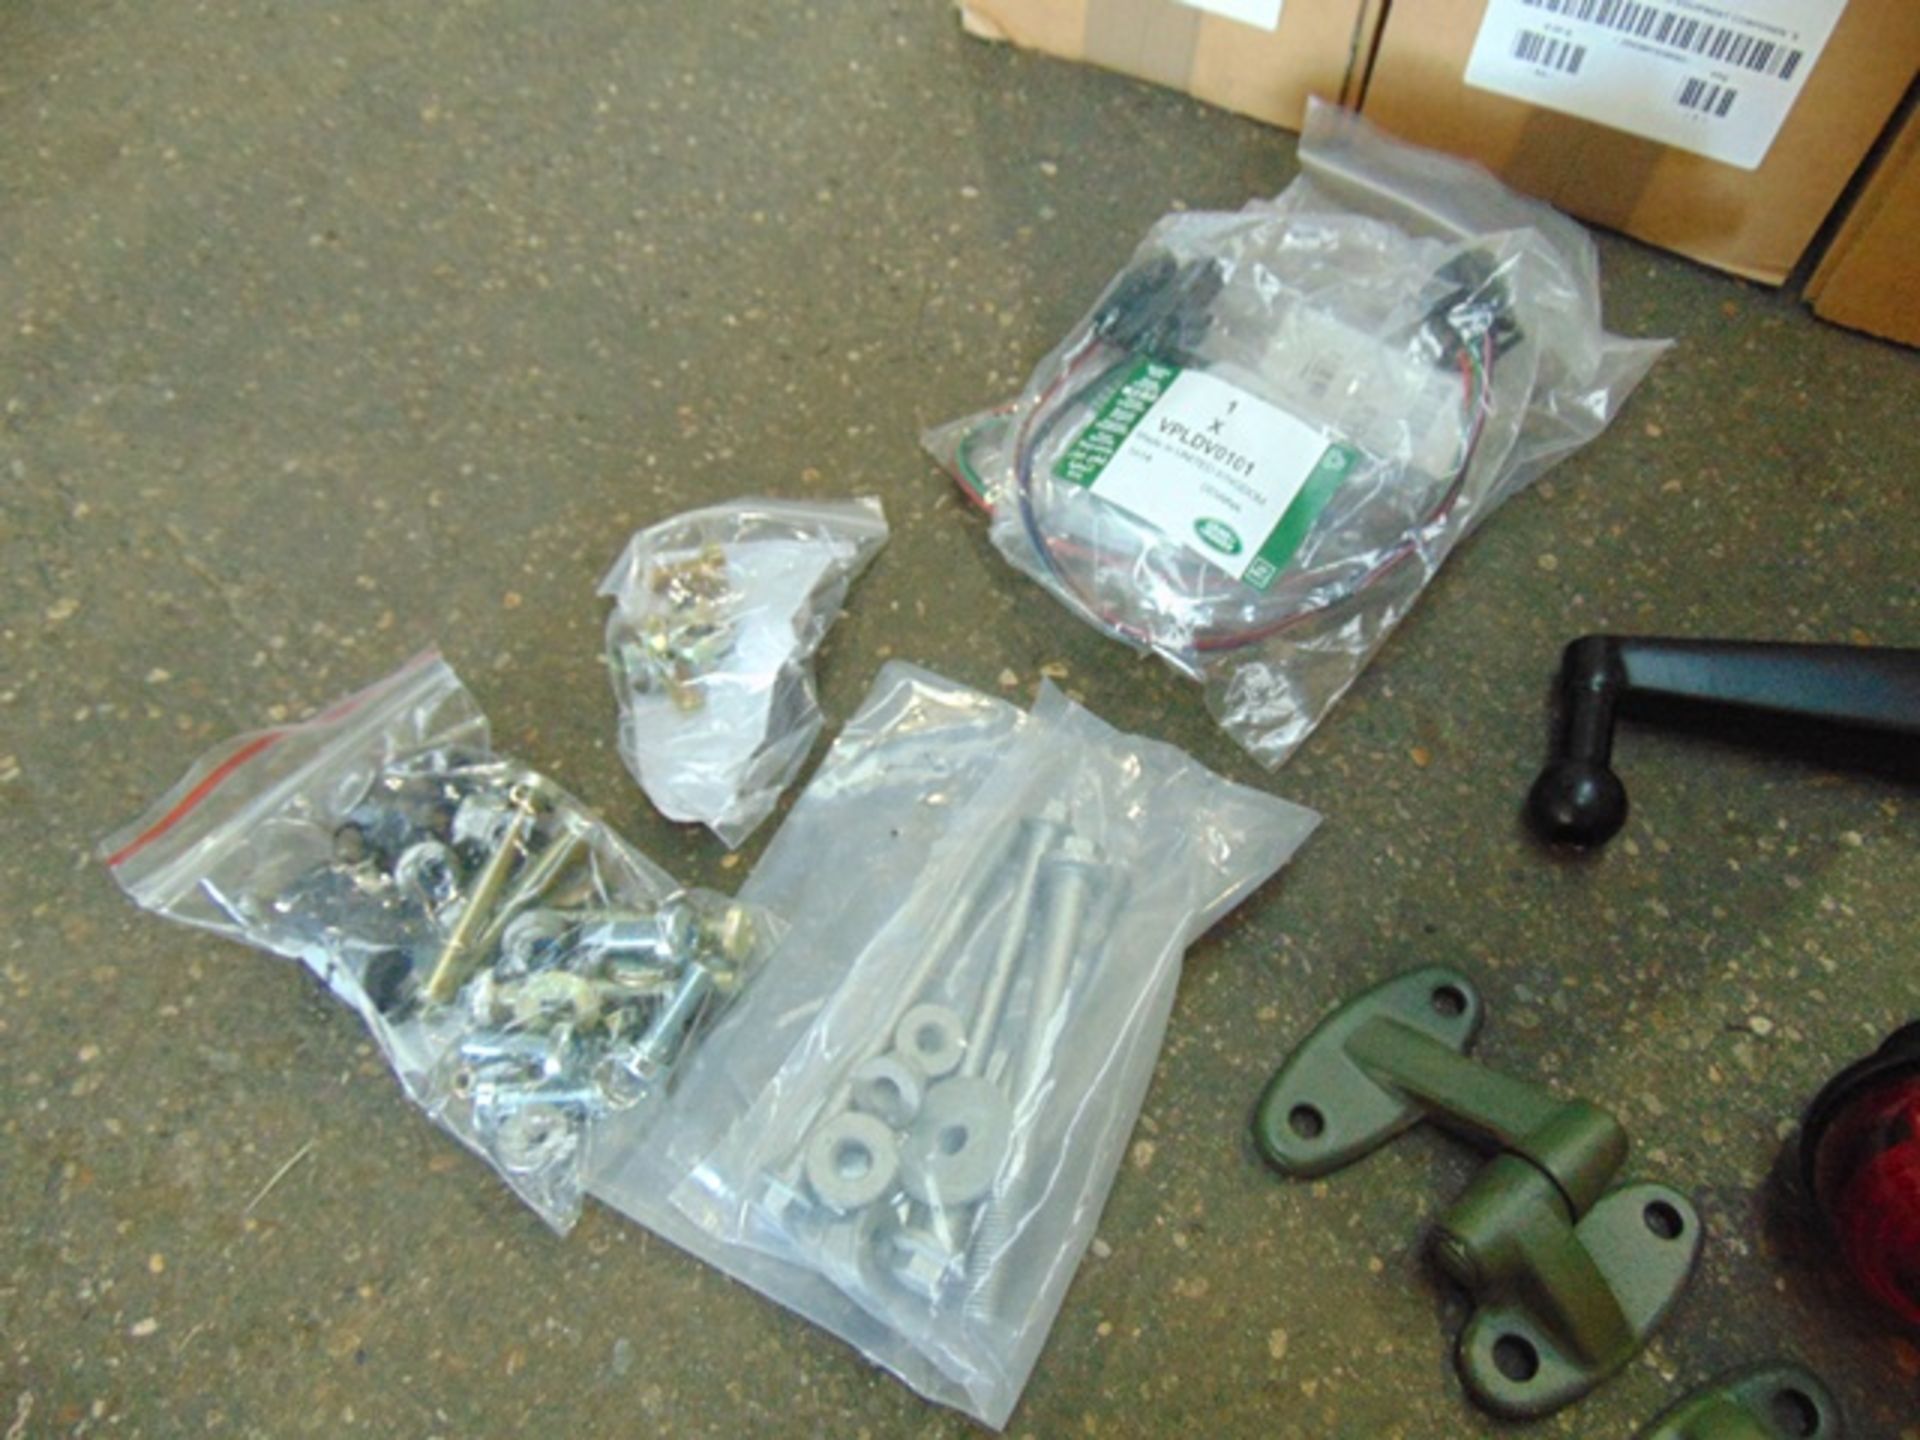 10 x Land Rover 90/110 Soft Top Modification Kits - Image 4 of 4